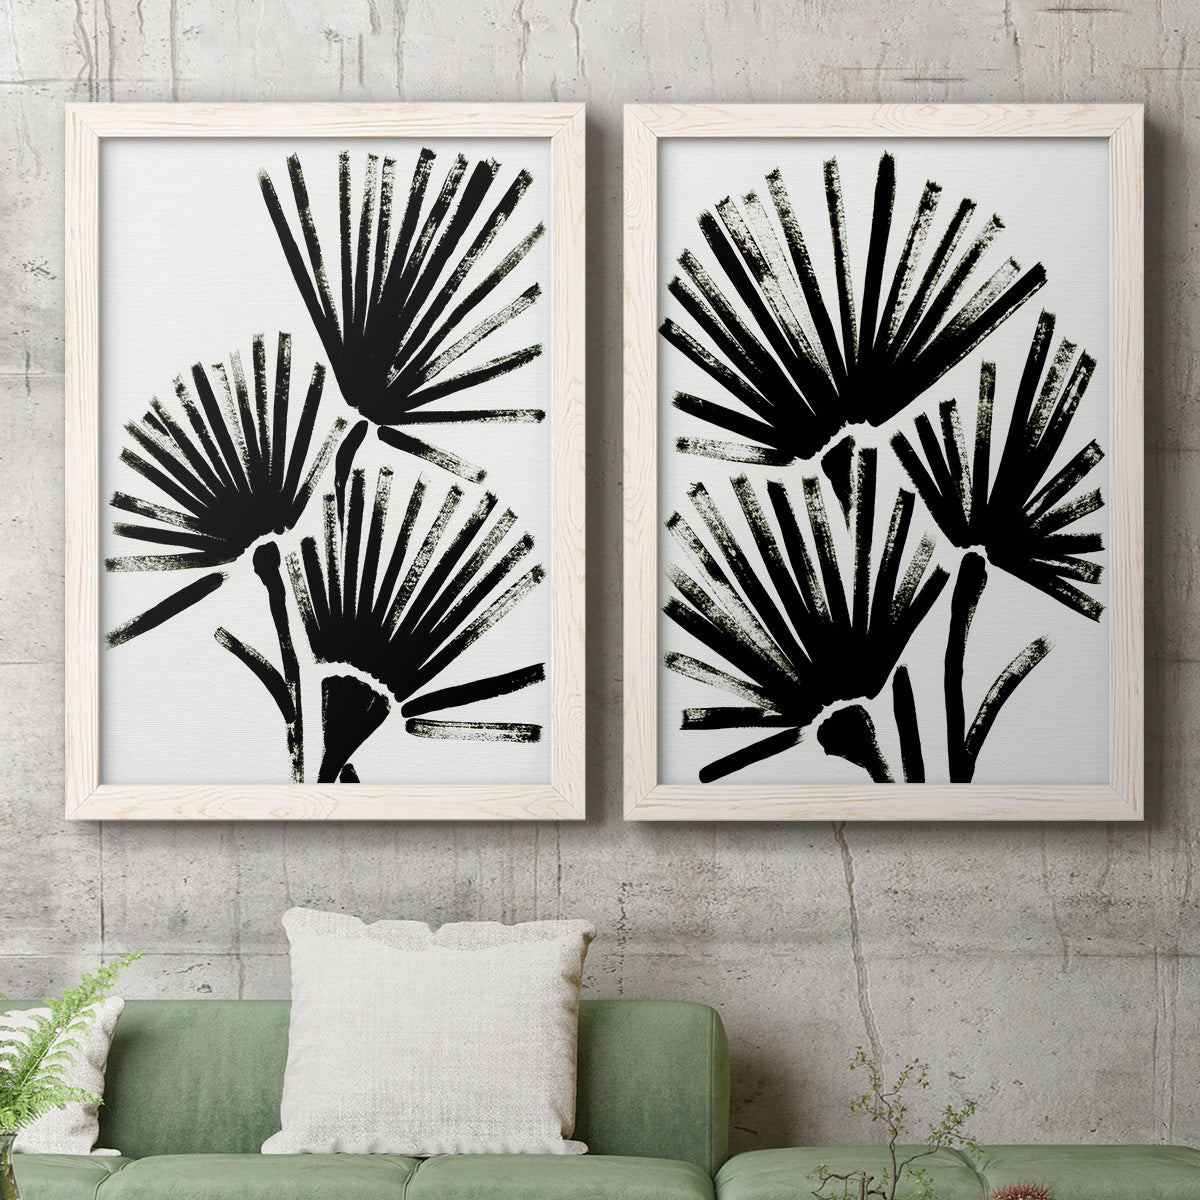 Fan Brush I - Premium Framed Canvas 2 Piece Set - Ready to Hang